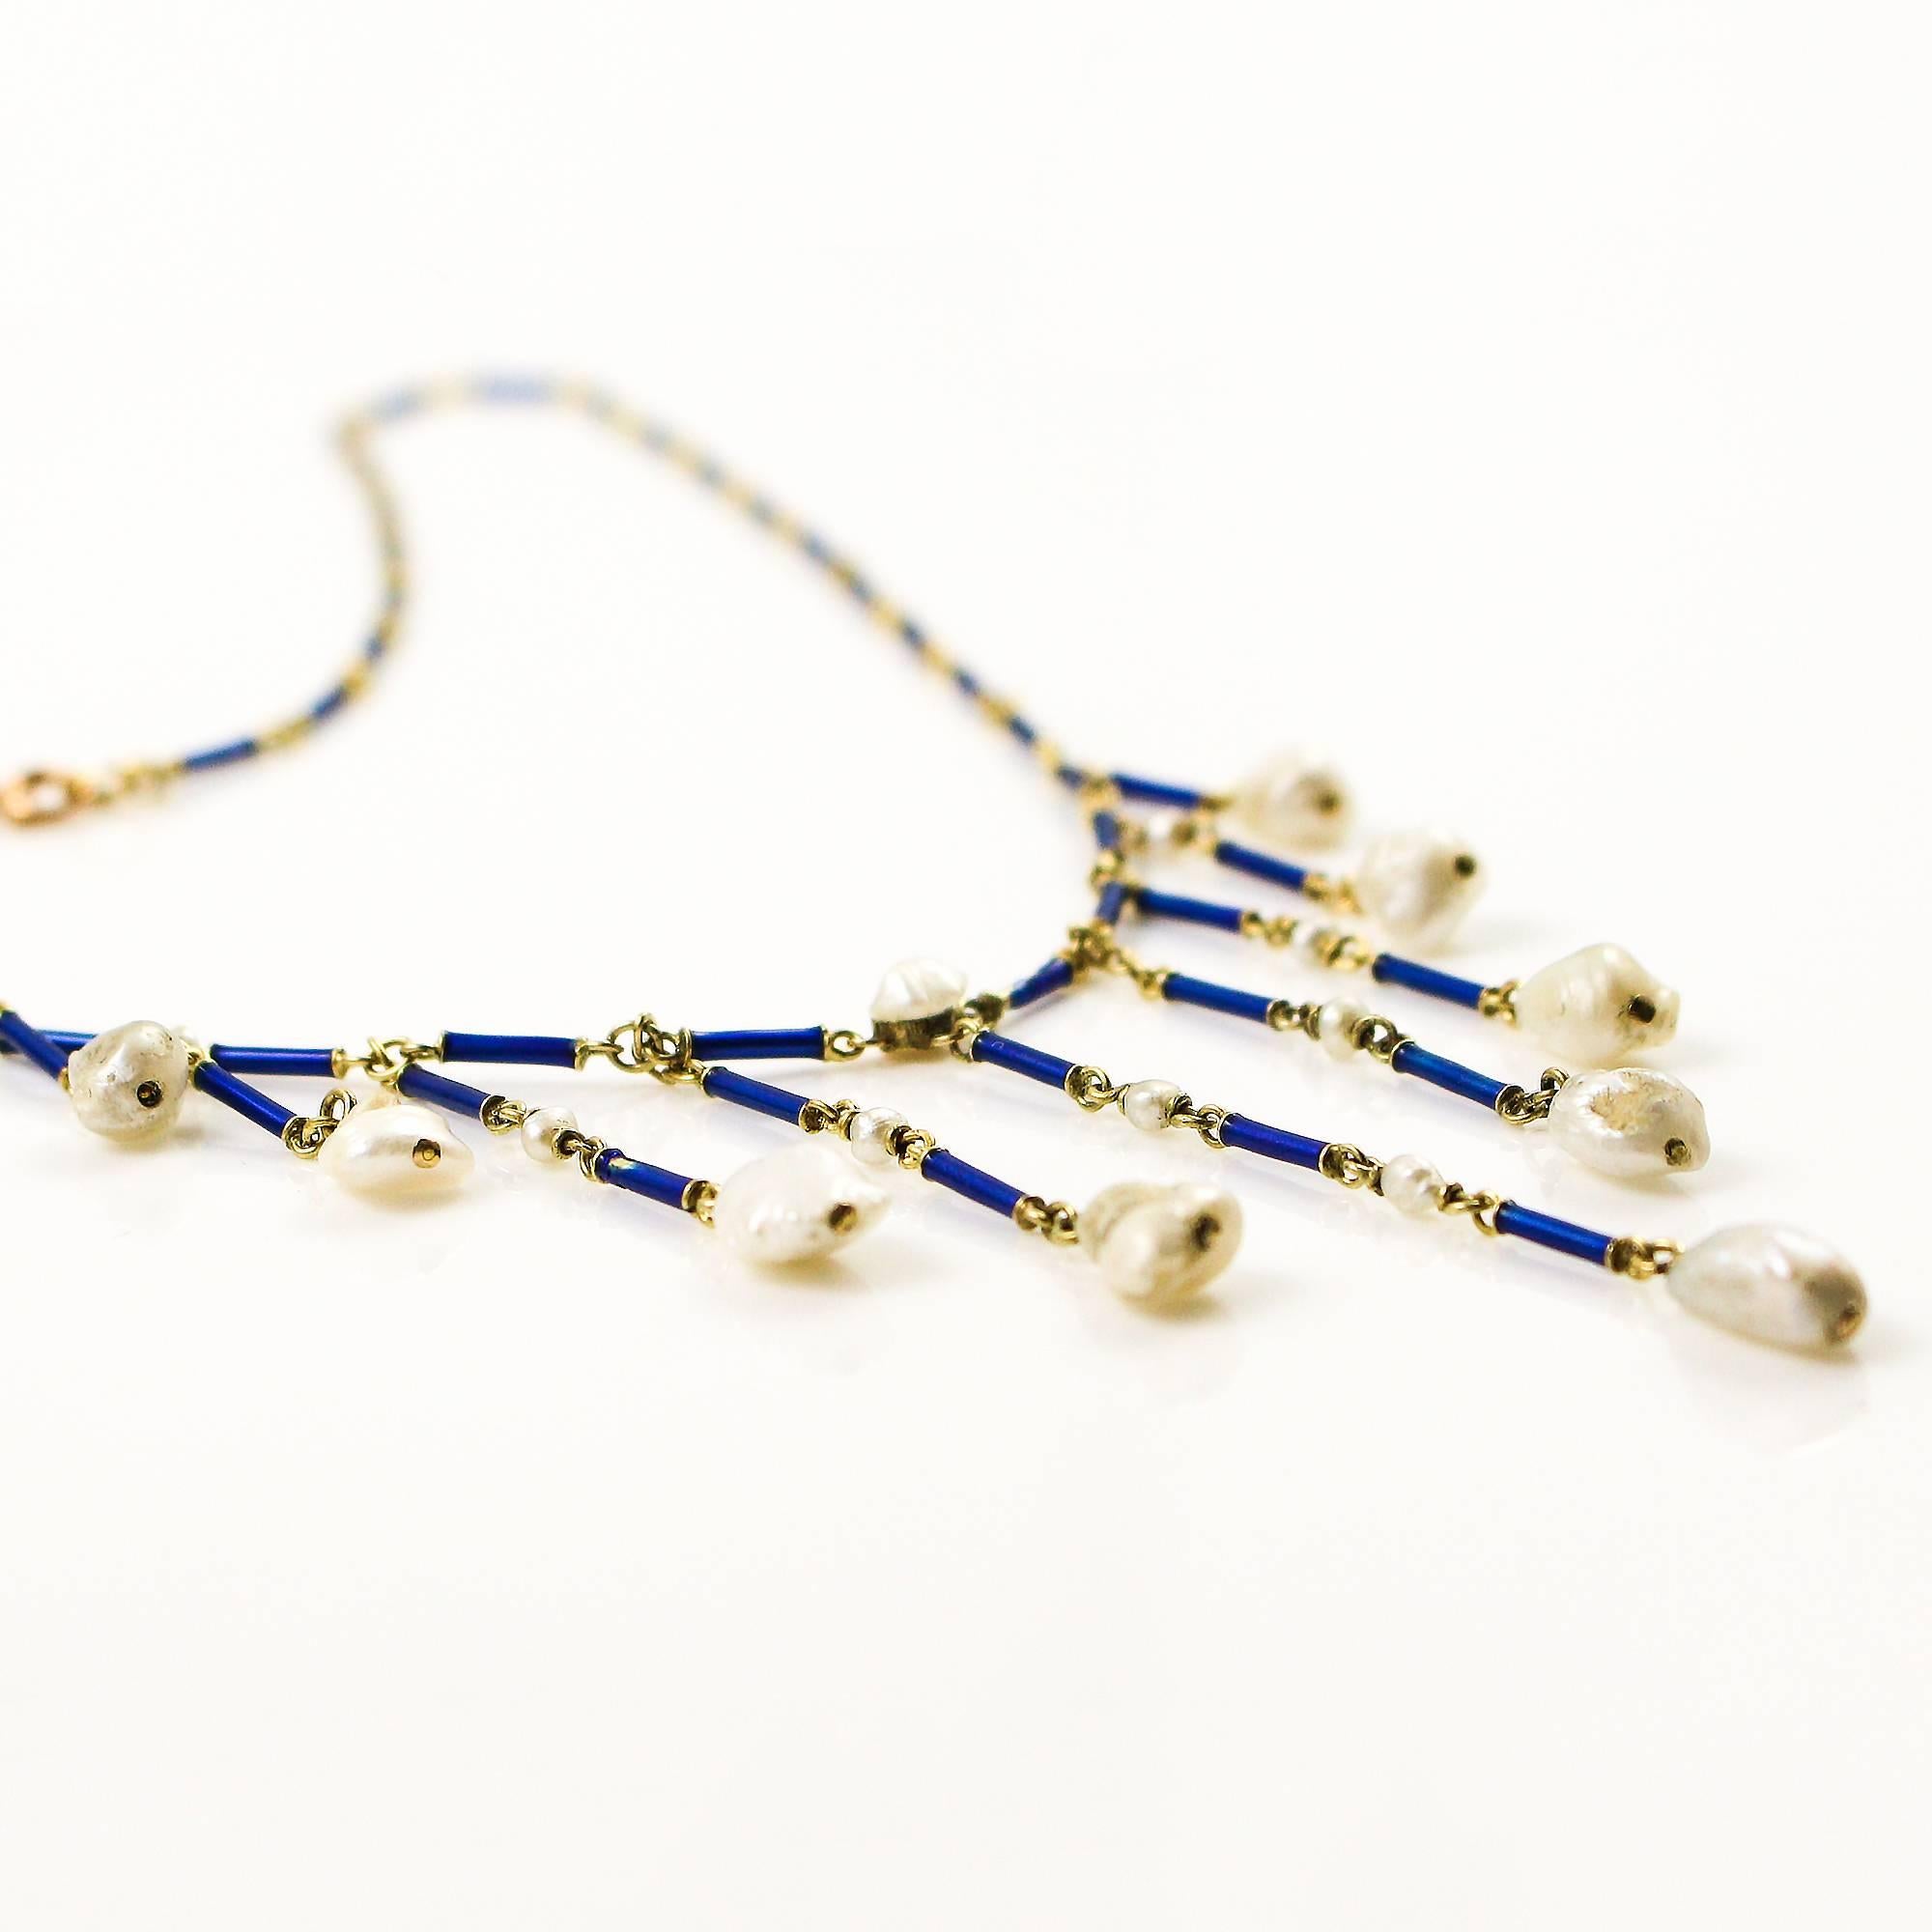 This beautiful drape-style necklace is constructed with 14k yellow gold and with blue enamel links going all the way around and 18 natural Biwa pearls. The enamel is in near perfect condition showing no noticeable signs of wear. The necklace is 18